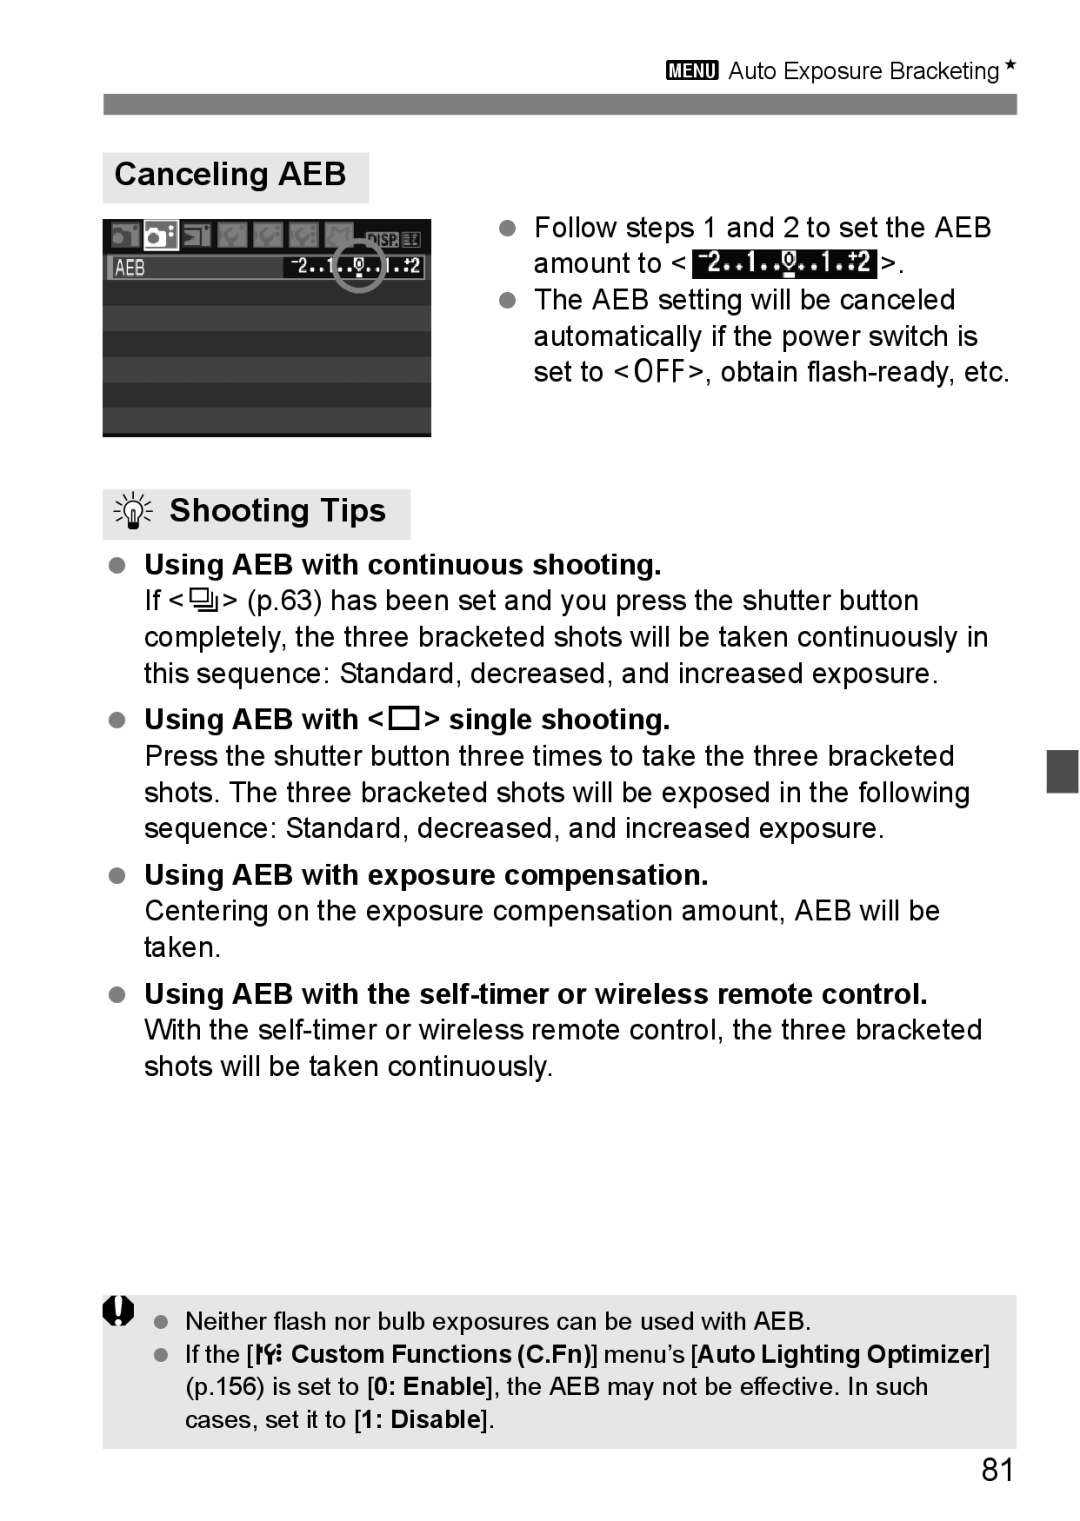 Canon EOS 450D instruction manual Canceling AEB, Using AEB with continuous shooting, Using AEB with u single shooting 